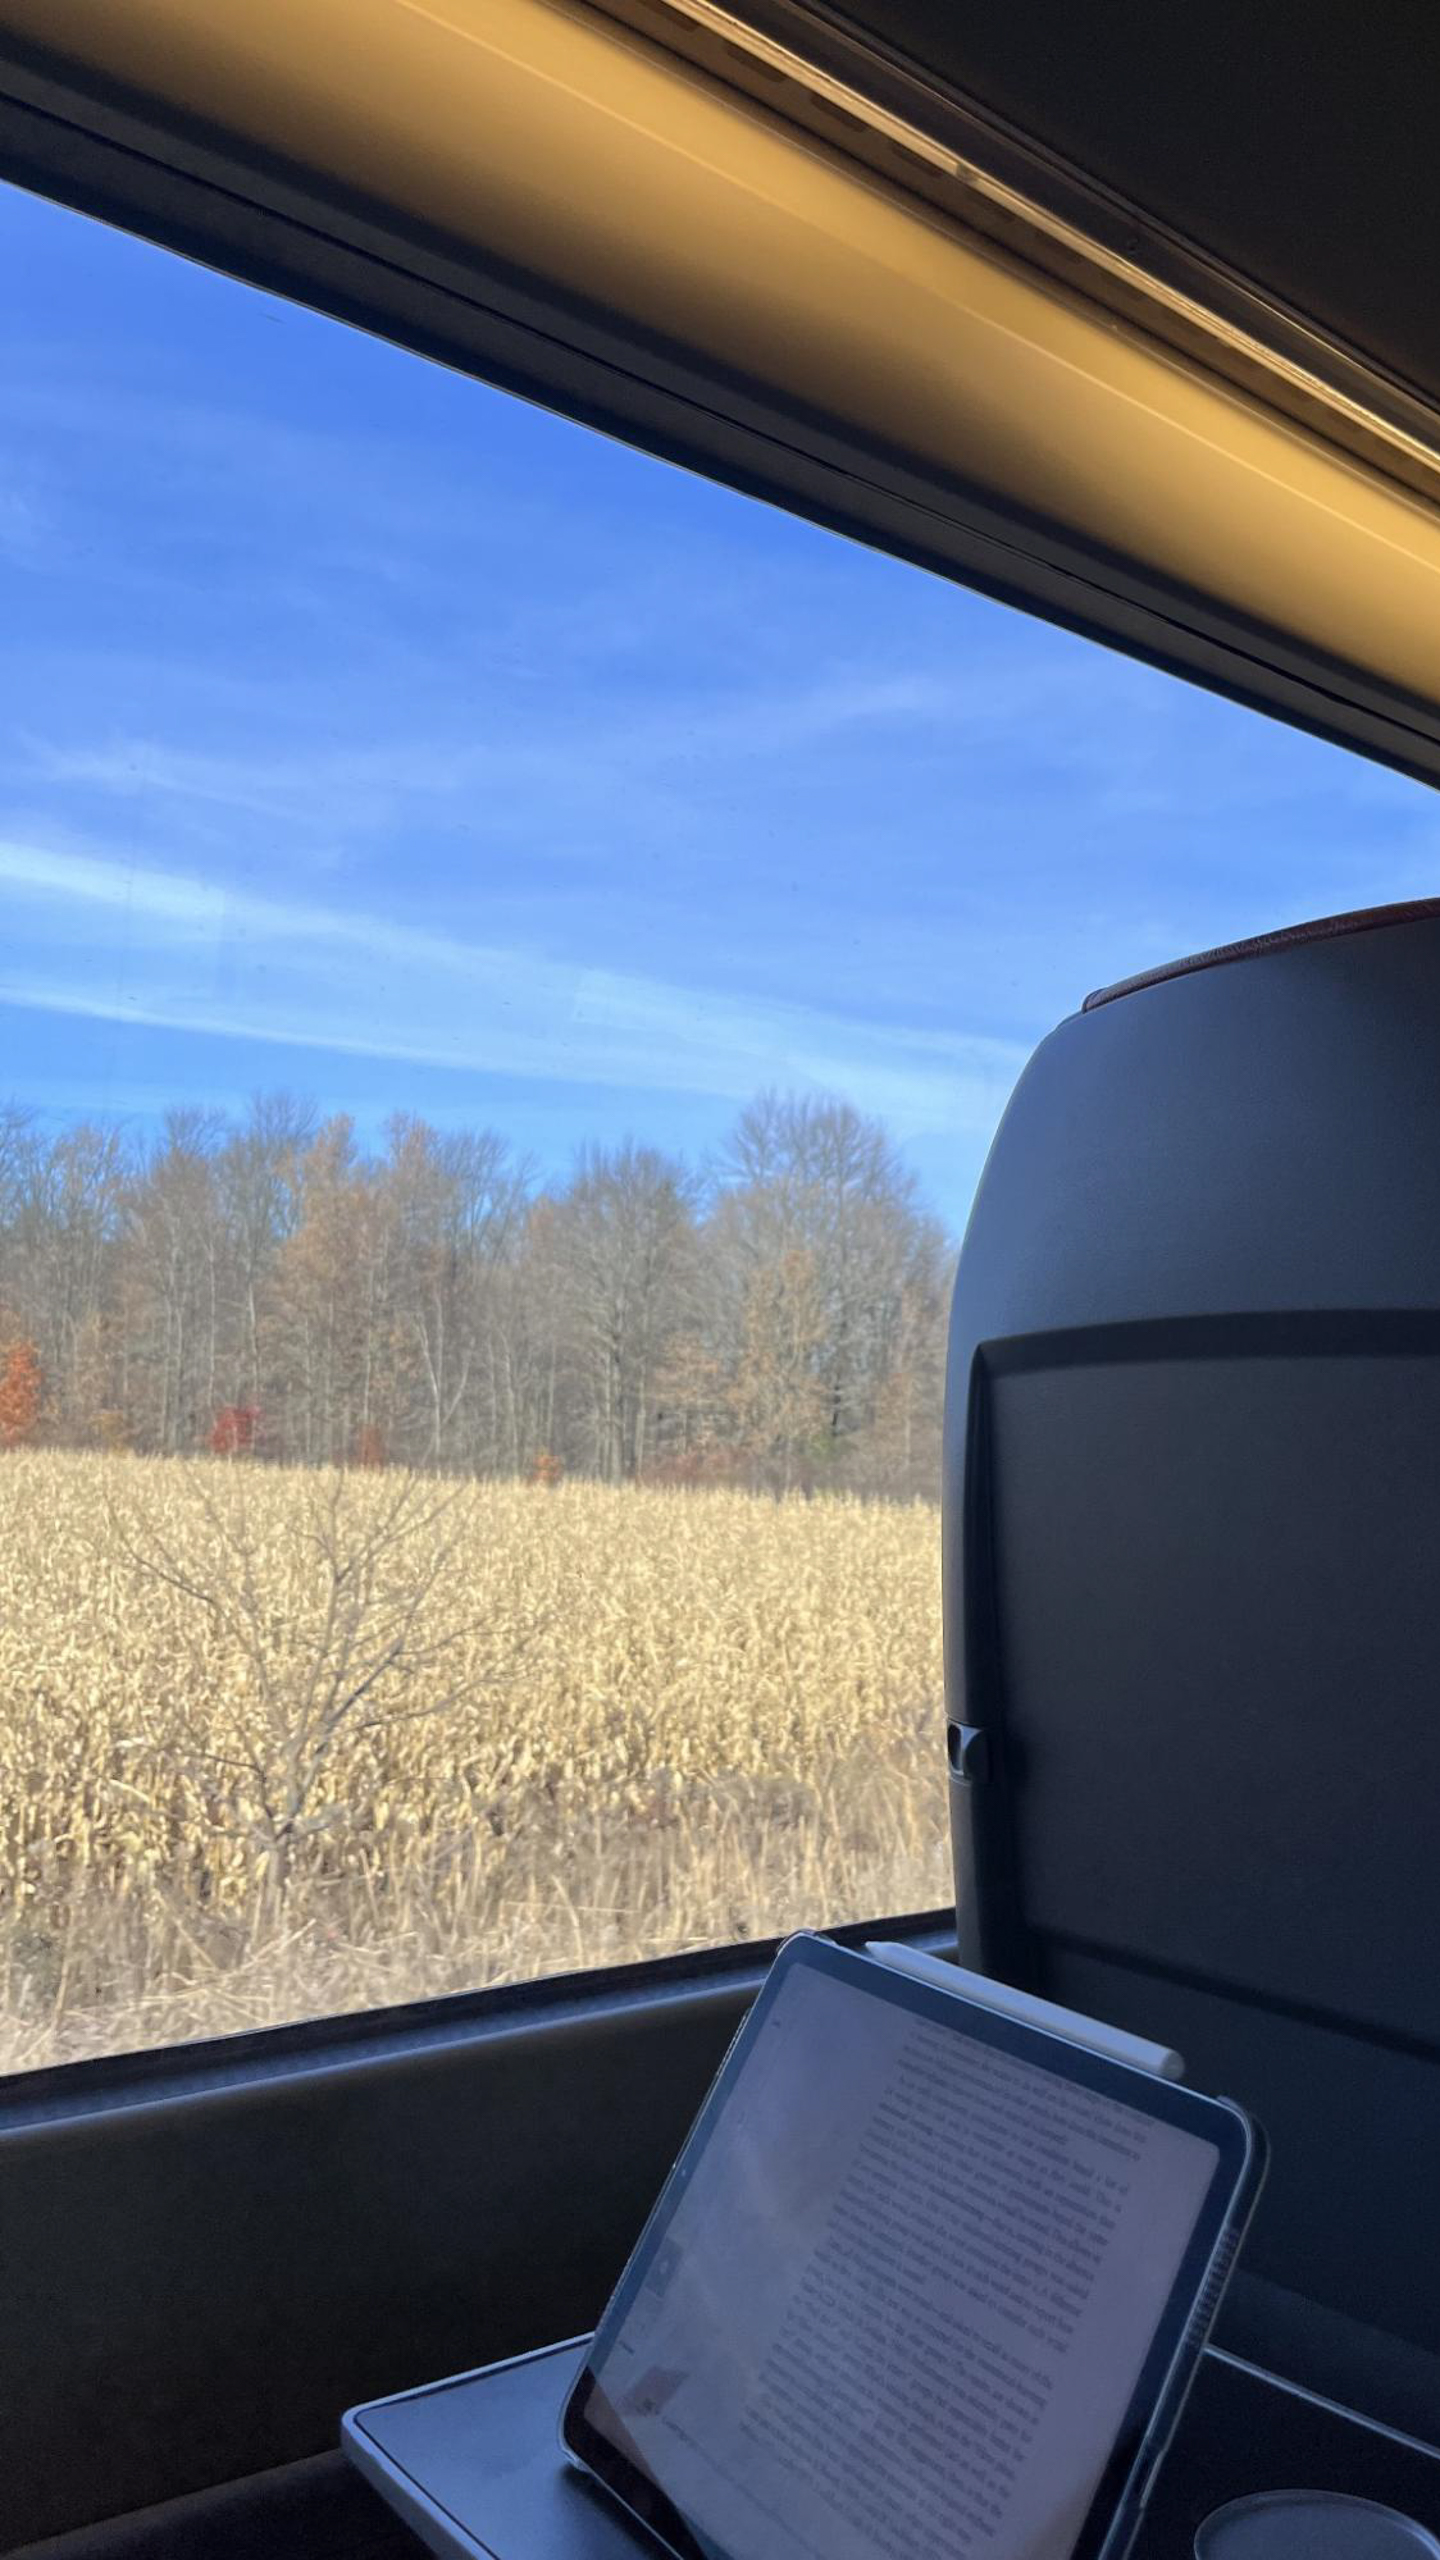 Work tablet on train seat table with a view of farm field